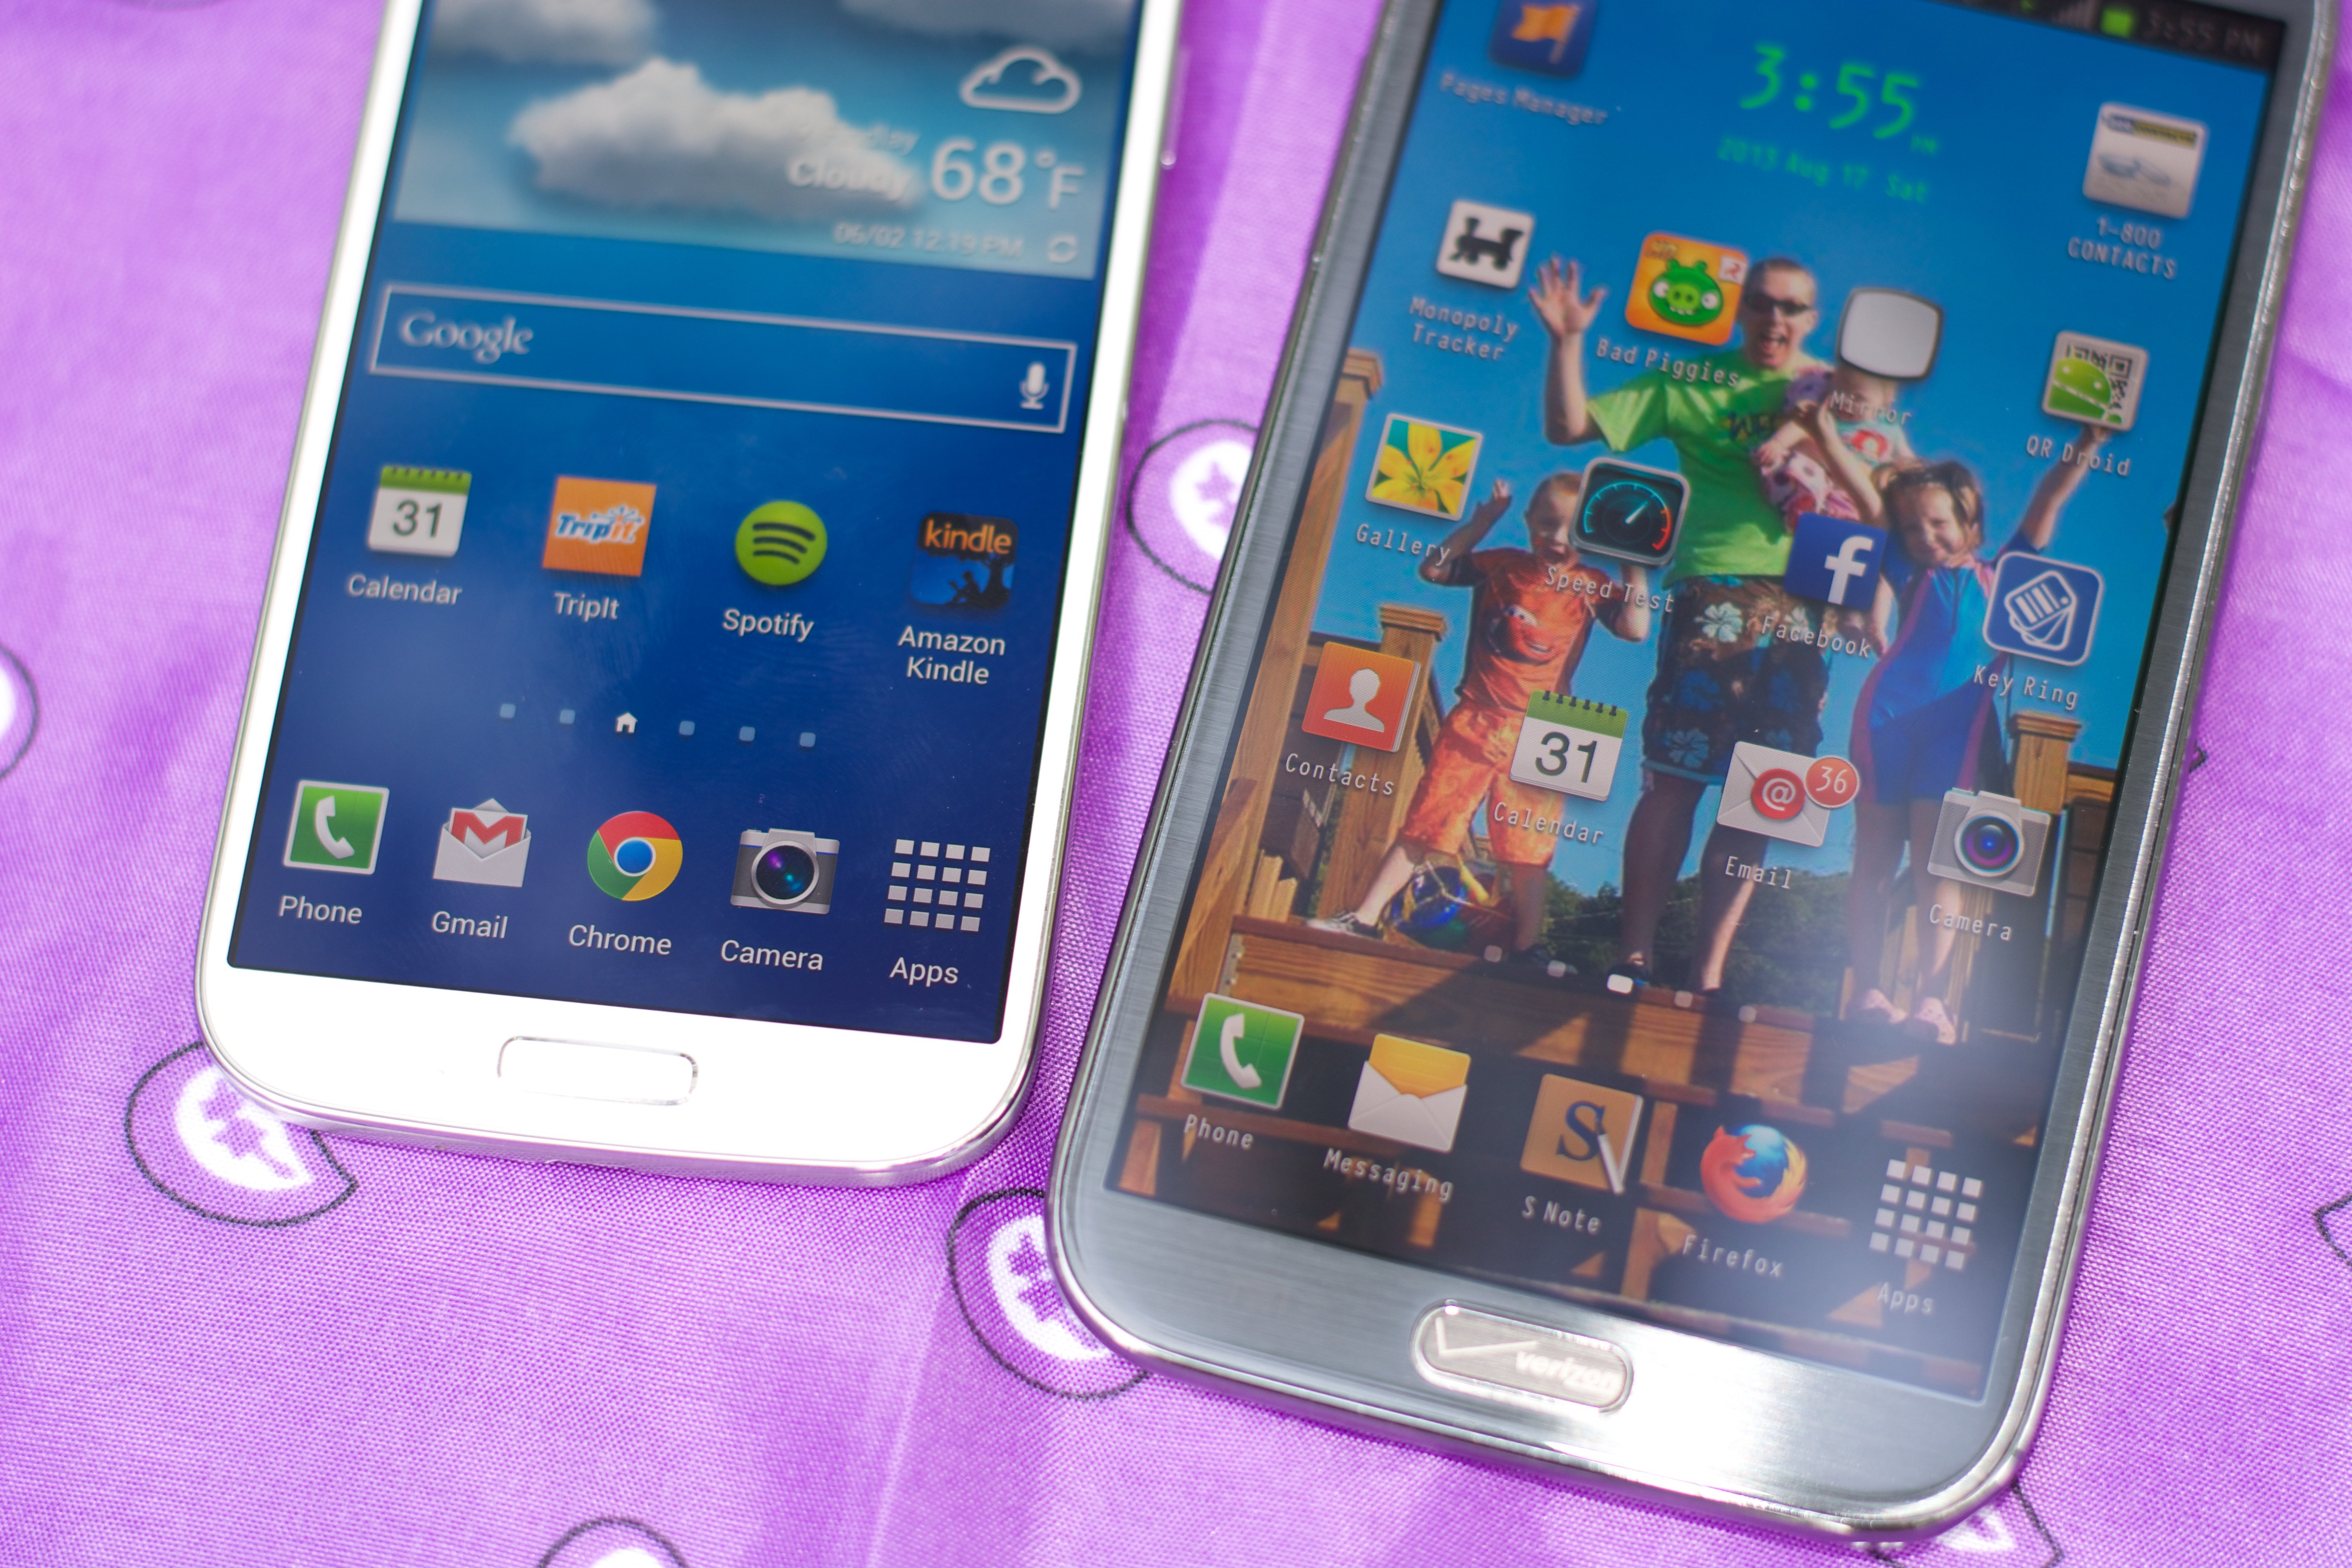 Like the Galaxy S4, look for a fast Galaxy Note 3 release date.